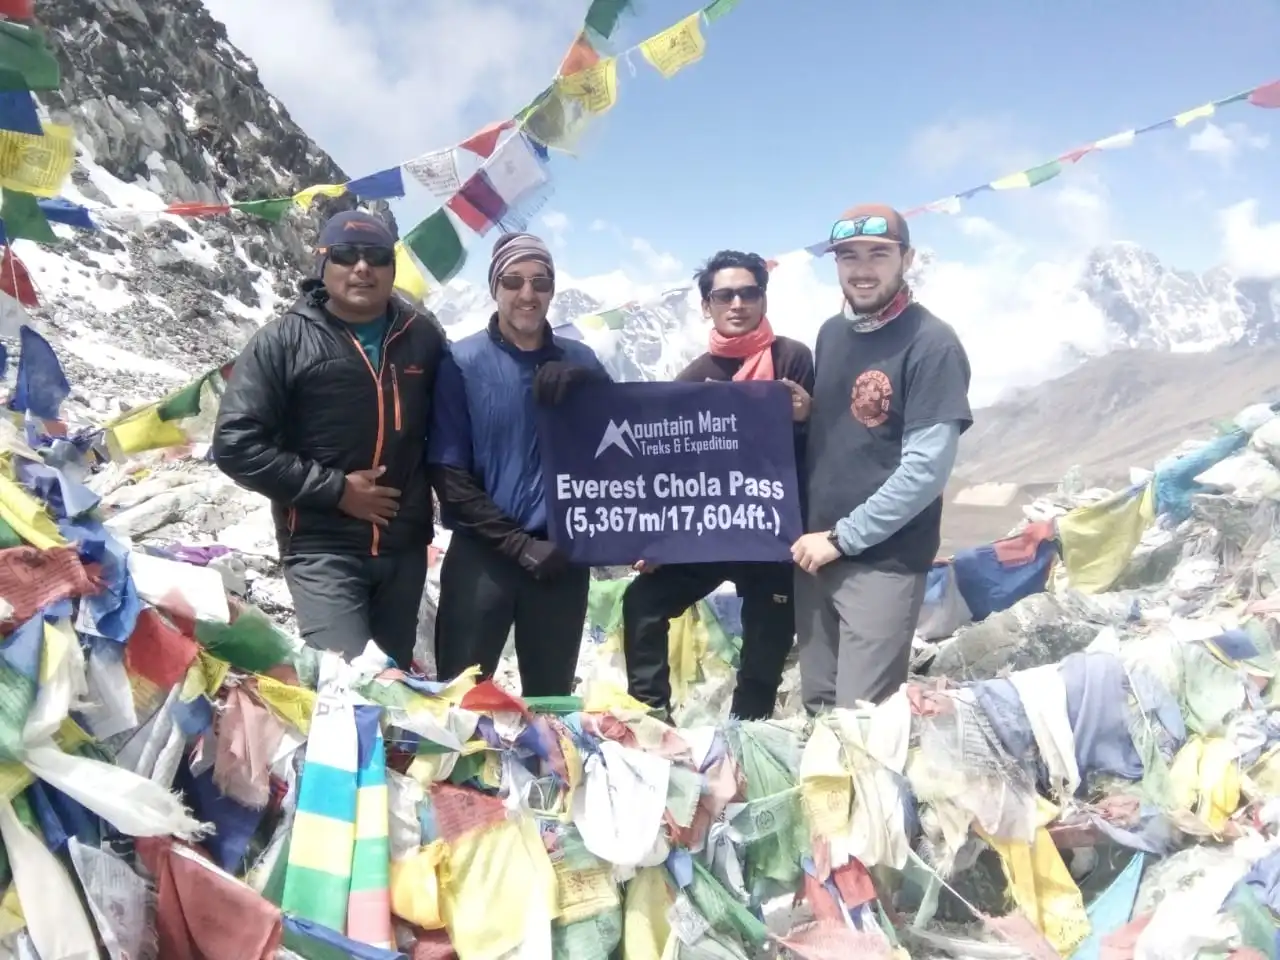 An Independent Trekkers Guide To Everest Base Camp - Guide or No Guide?